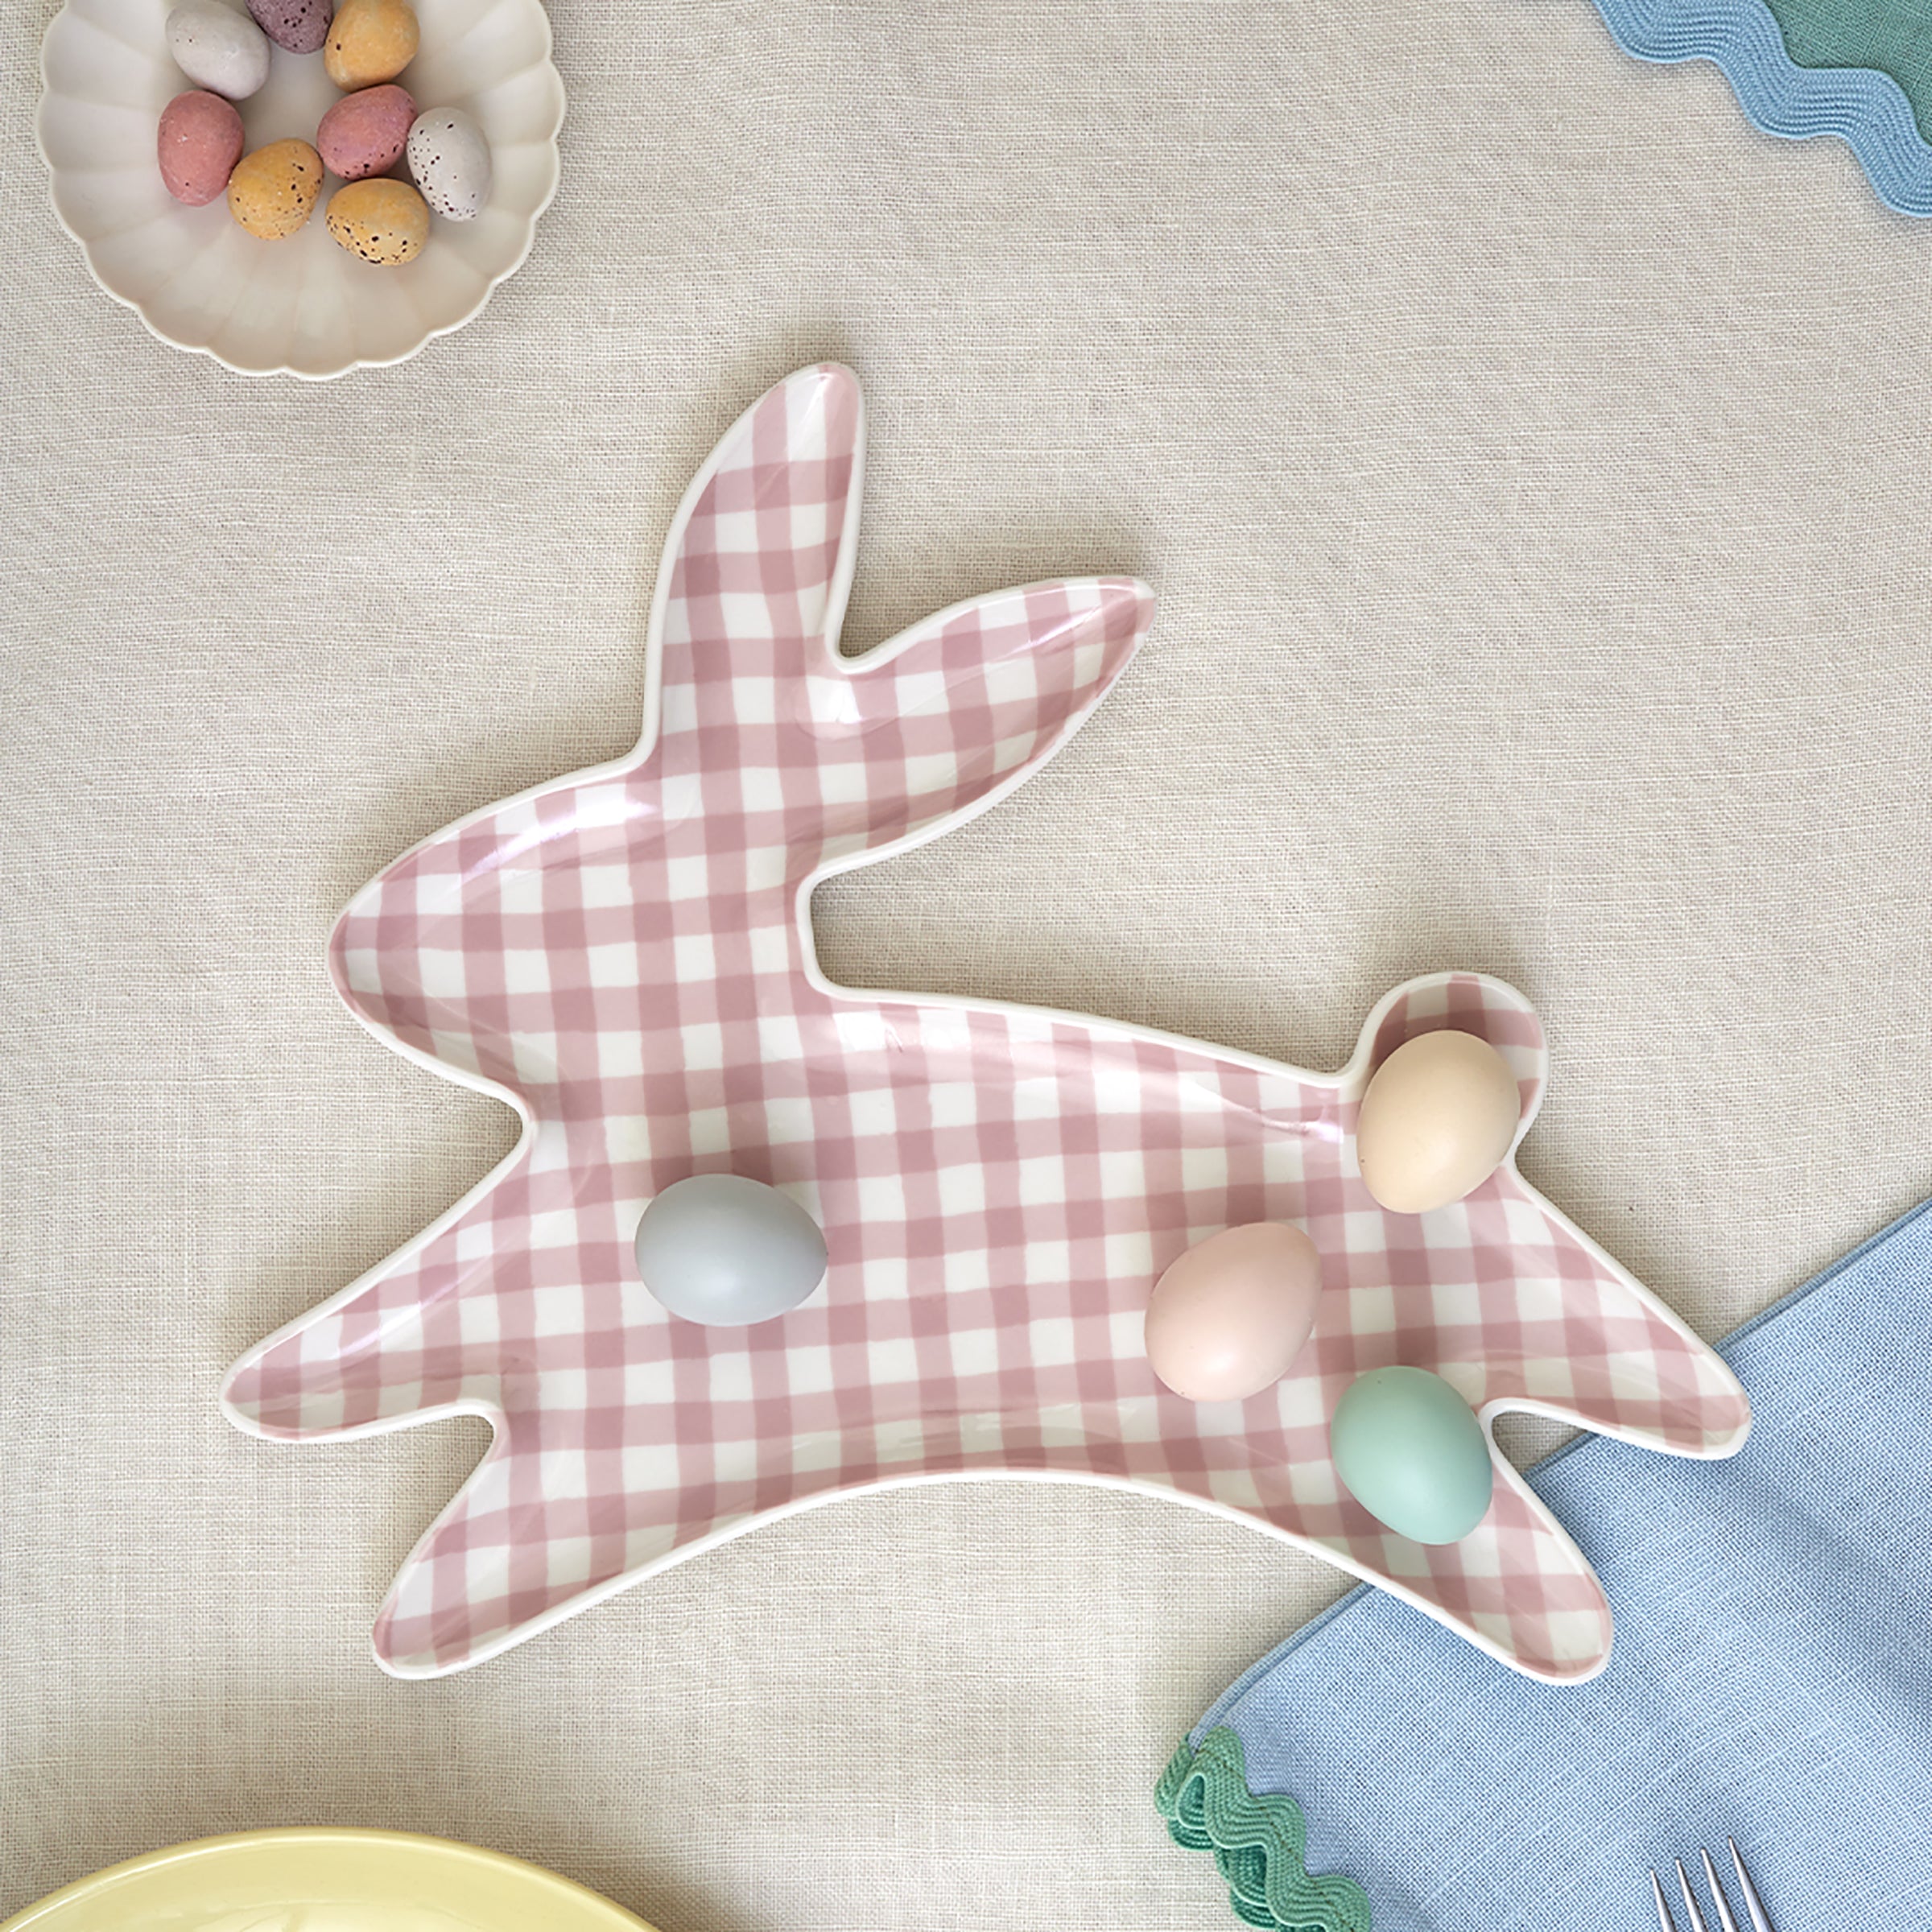 Resuable porcelain plates for parties with an on-trend gingham design and an adorable bunny shape.